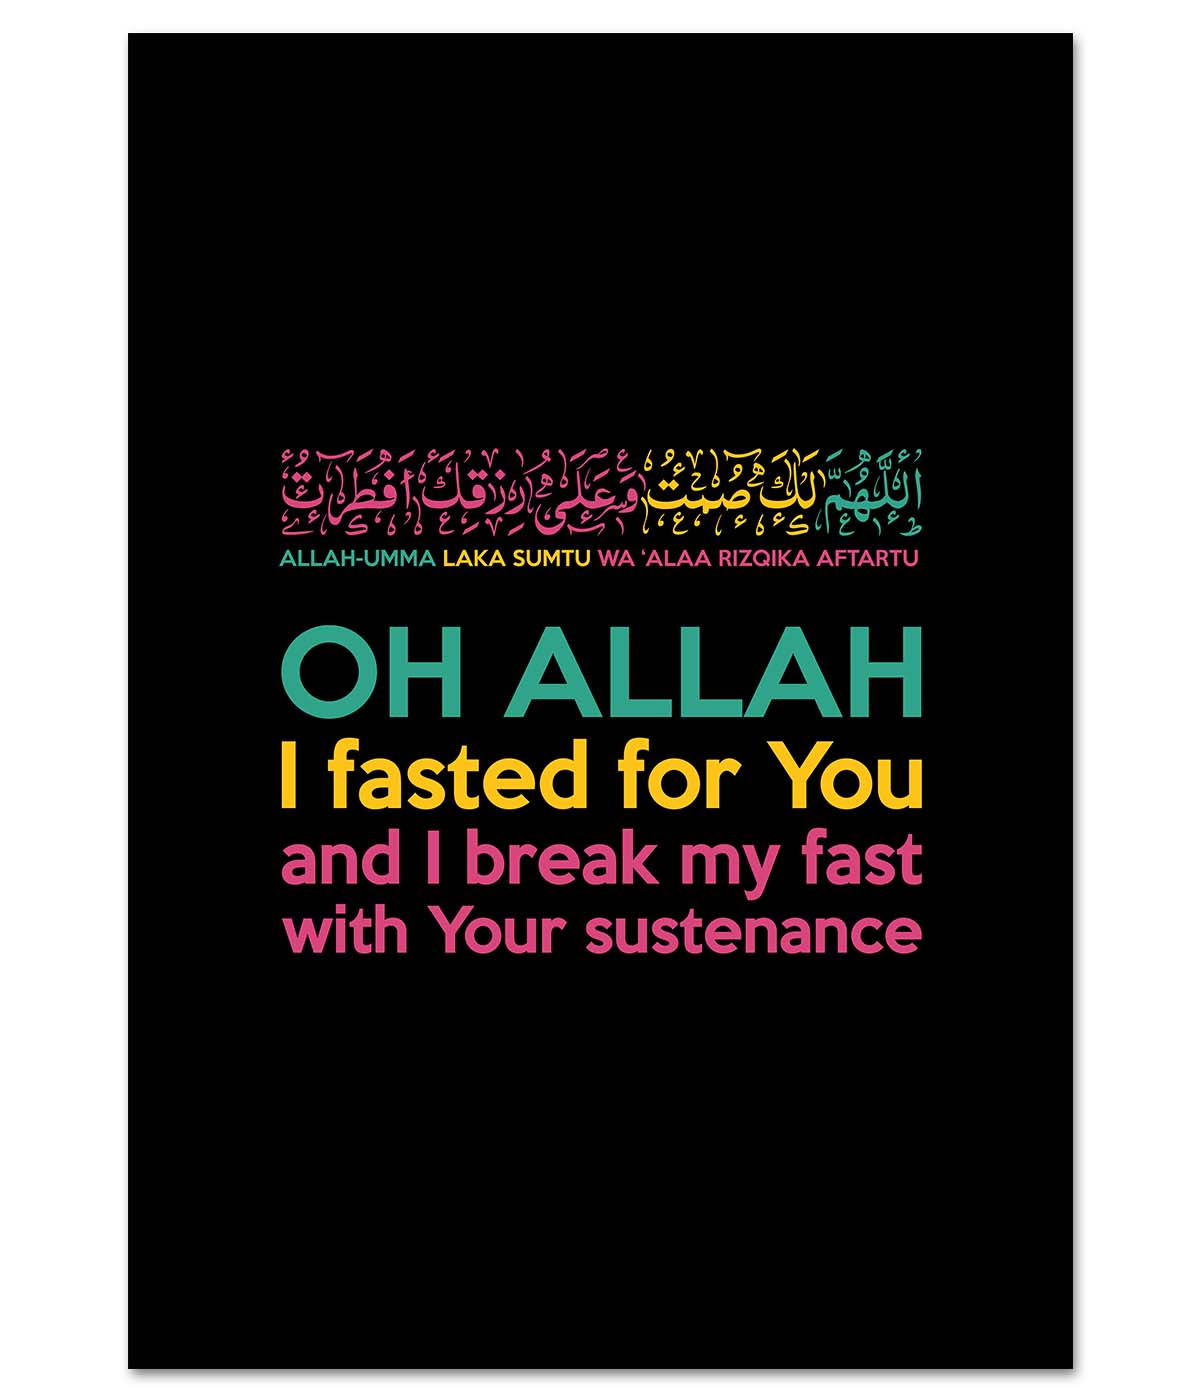 Tricolour Prayer on Breaking The Fast (print)